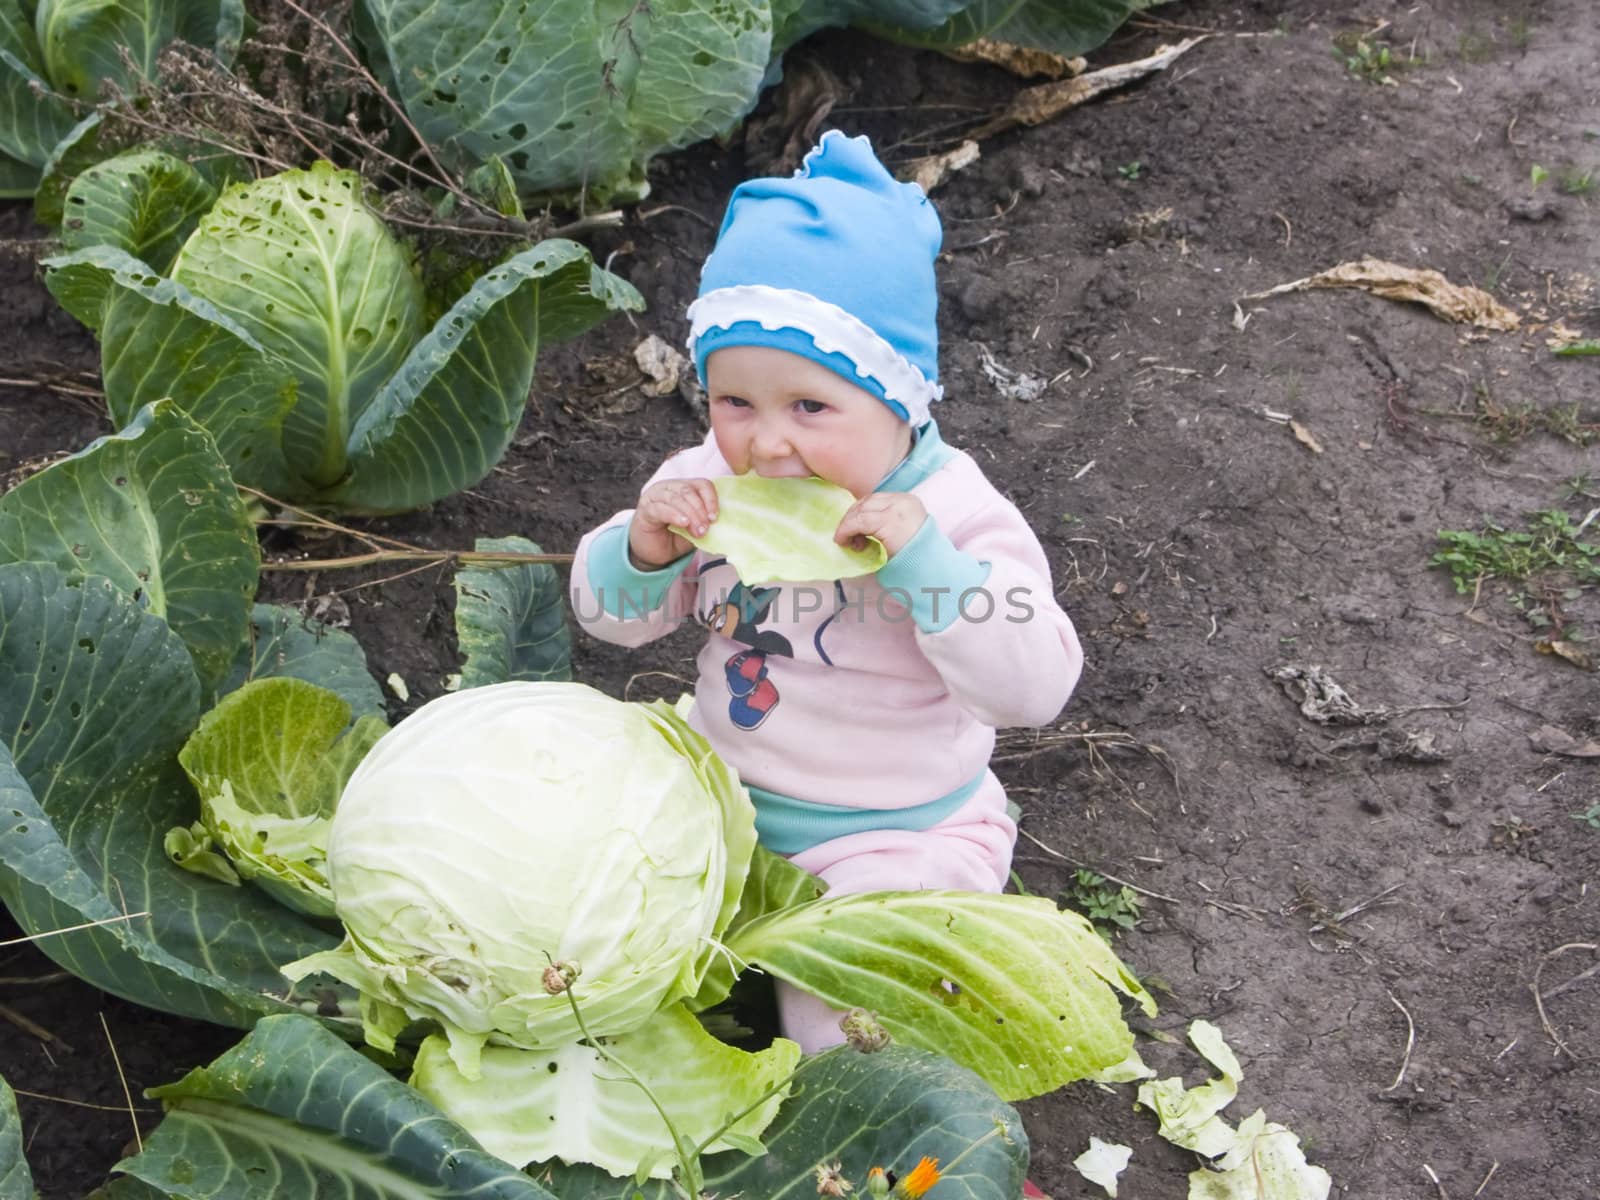 The image of the child sitting at a head of cabbage